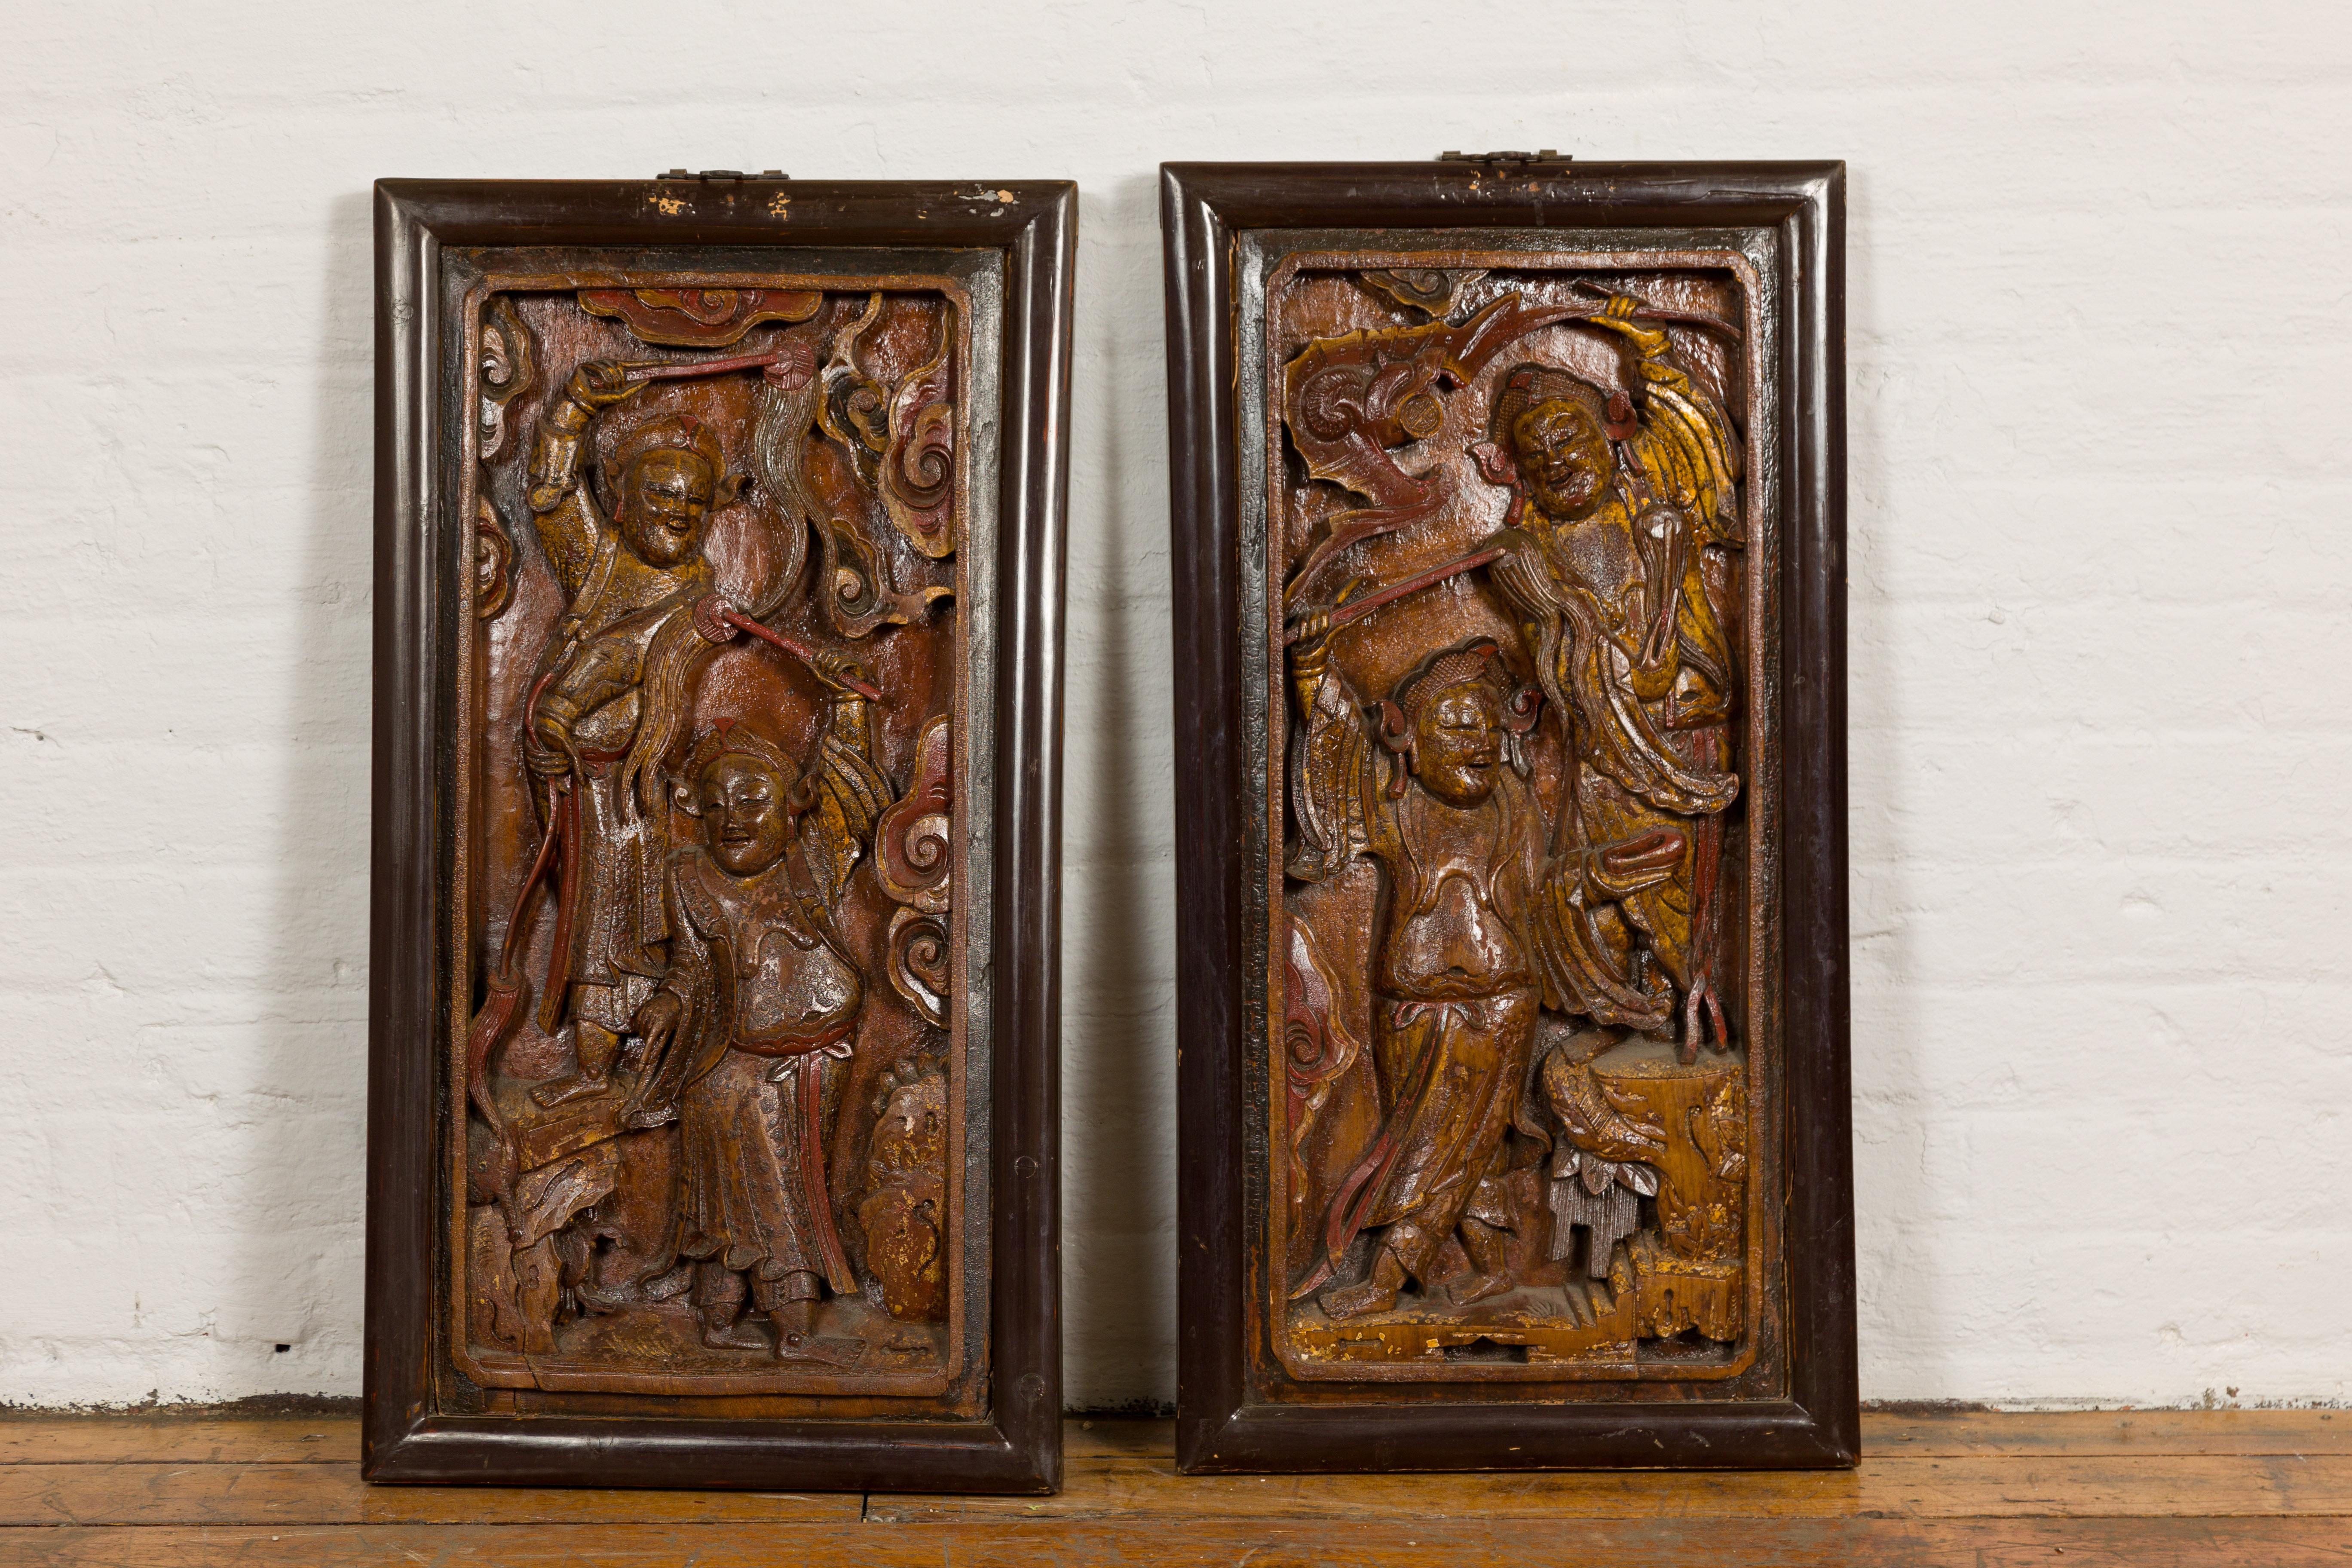 A pair of Chinese Qing Dynasty period hand-carved and lacquered puppet show signs from the 19th century each depicting two characters. Travel back to the vibrant world of 19th century Chinese theater with this pair of Qing Dynasty hand-carved puppet